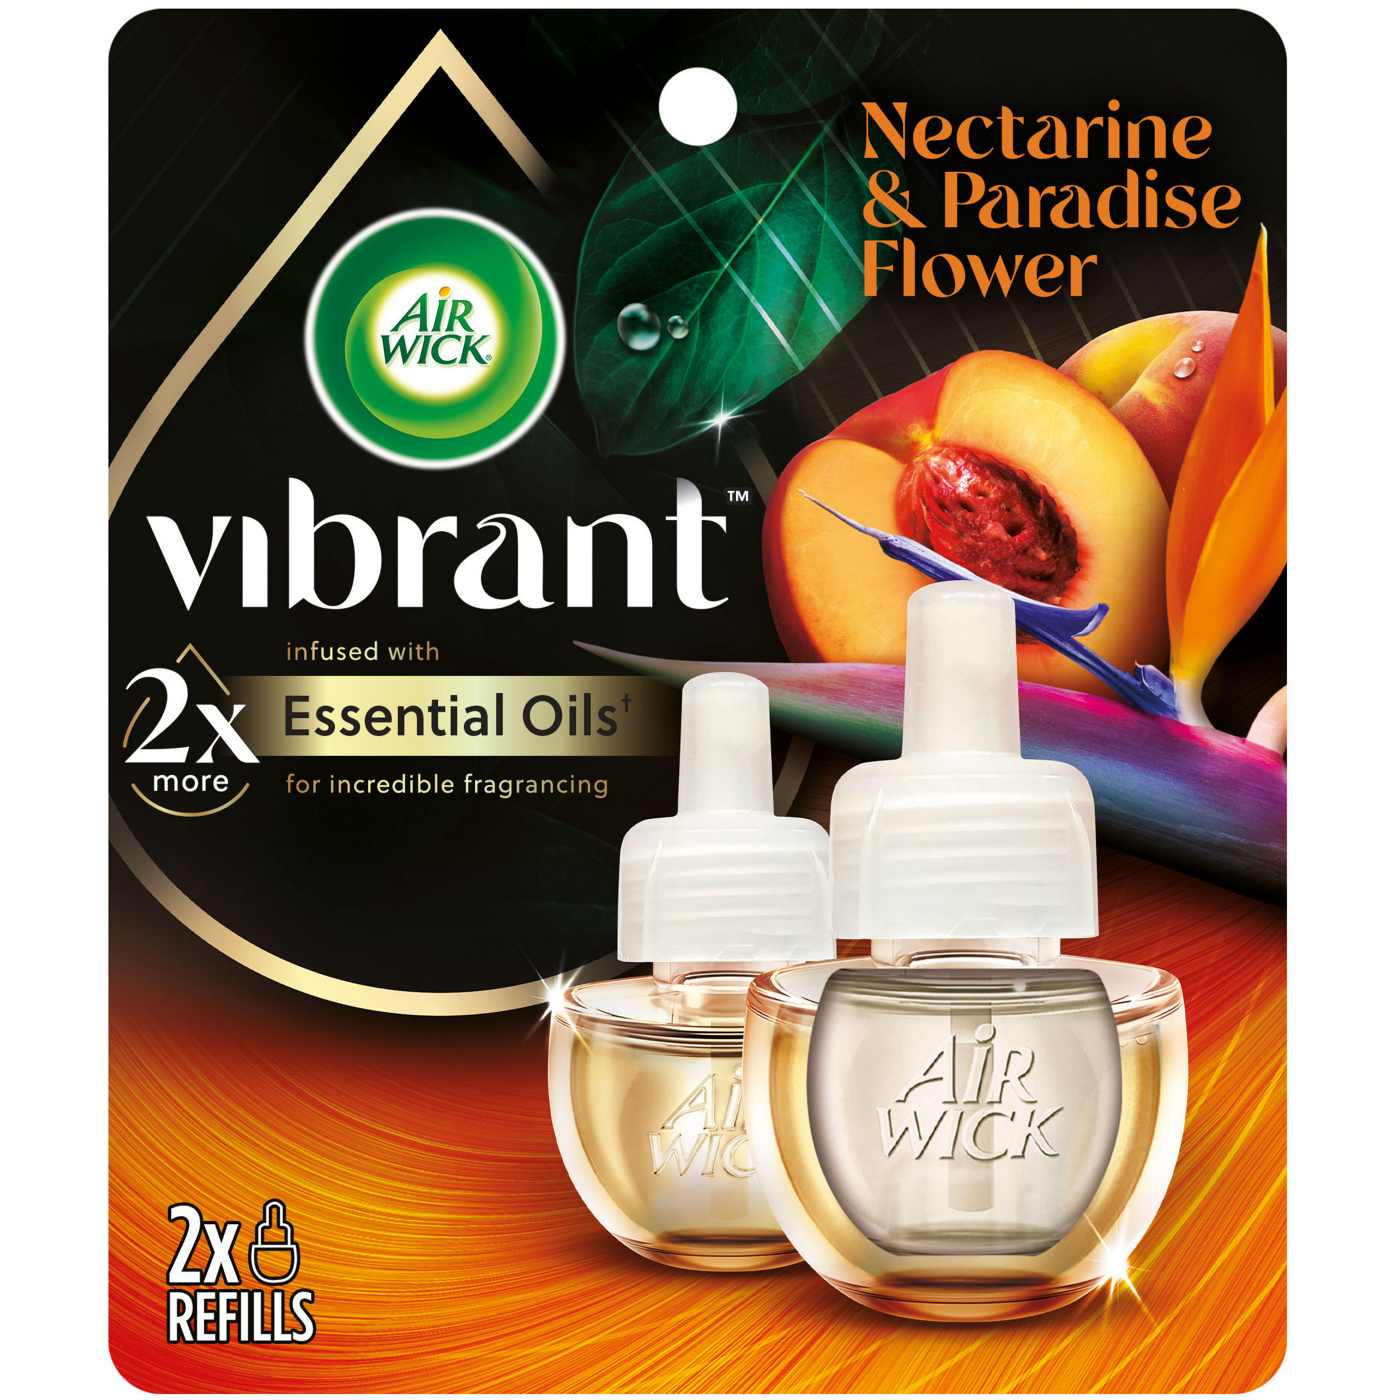 Air Wick Vibrant Scented Oil Refills - Nectarine & Paradise Flower; image 1 of 7